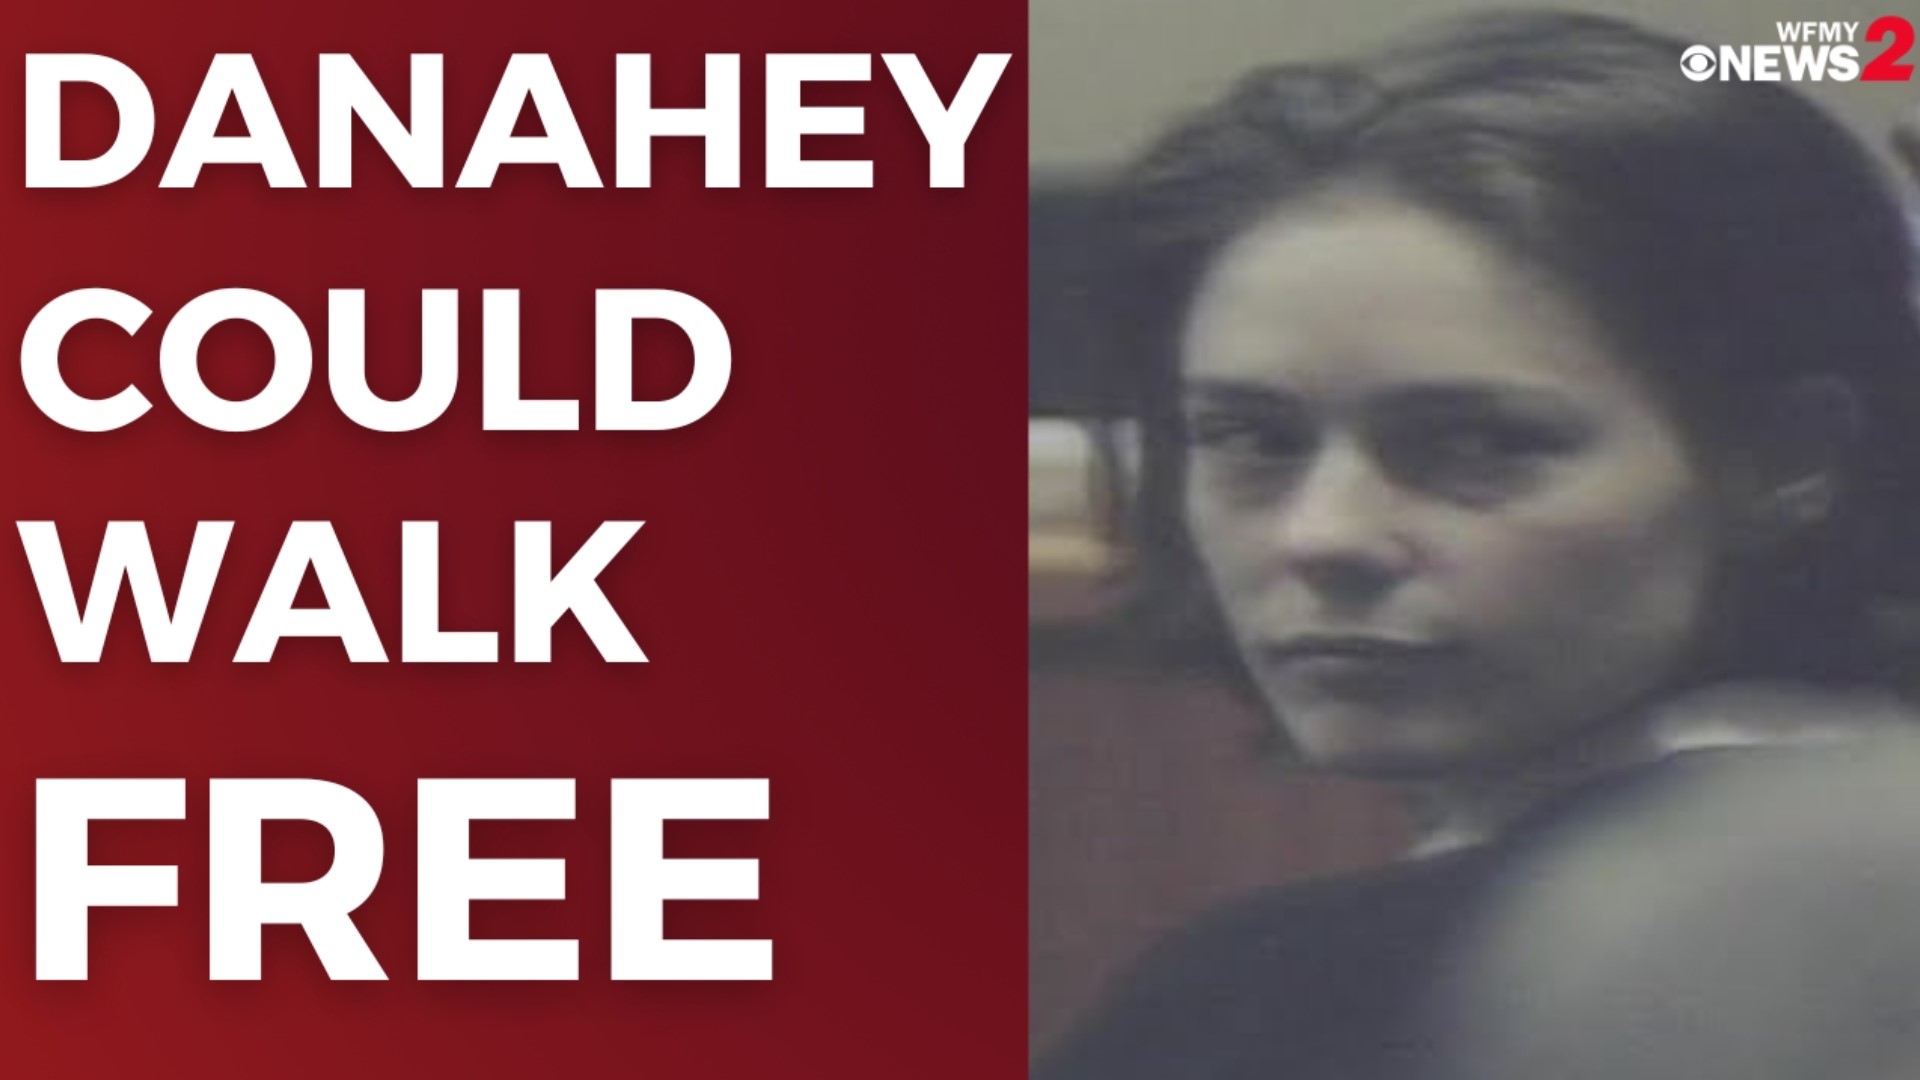 Danahey will be eligible for parole on January 1, 2023. Four people died in the fire she set in 2002.